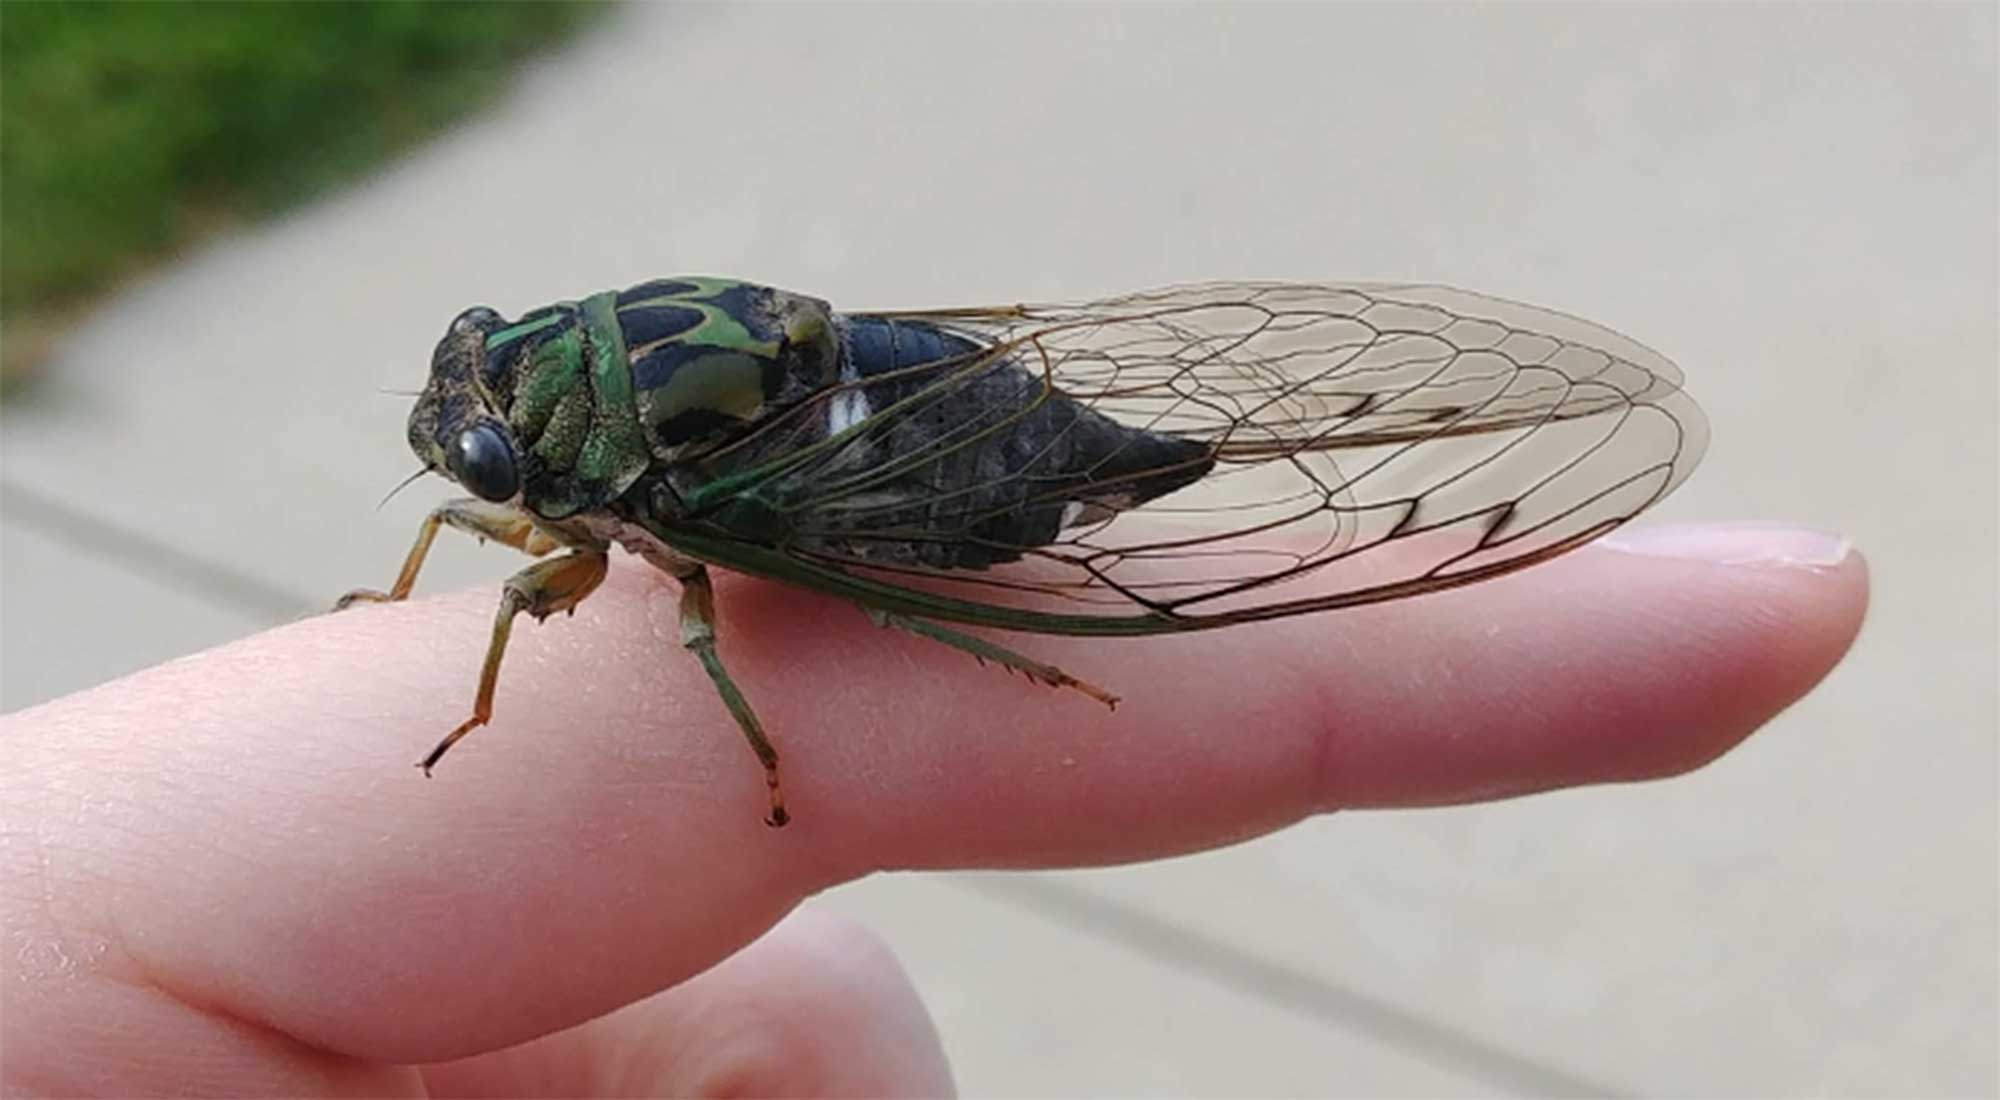 Brown and green insect with clear wings that are folded over its body like a tent.